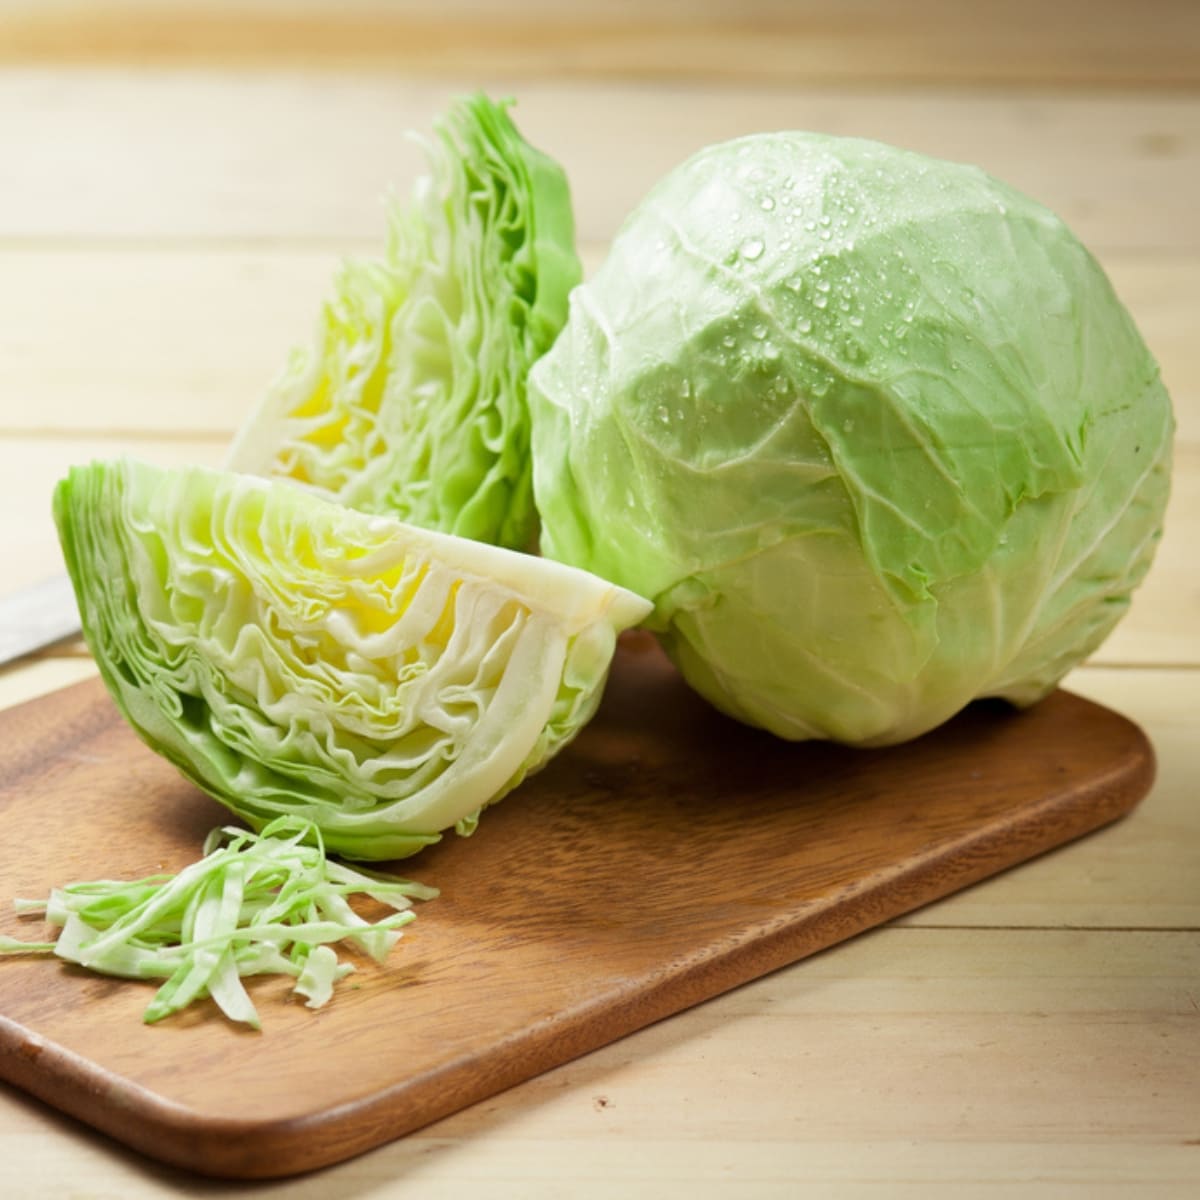 Whole and Sliced Cabbage on a Wooden Chopping Board